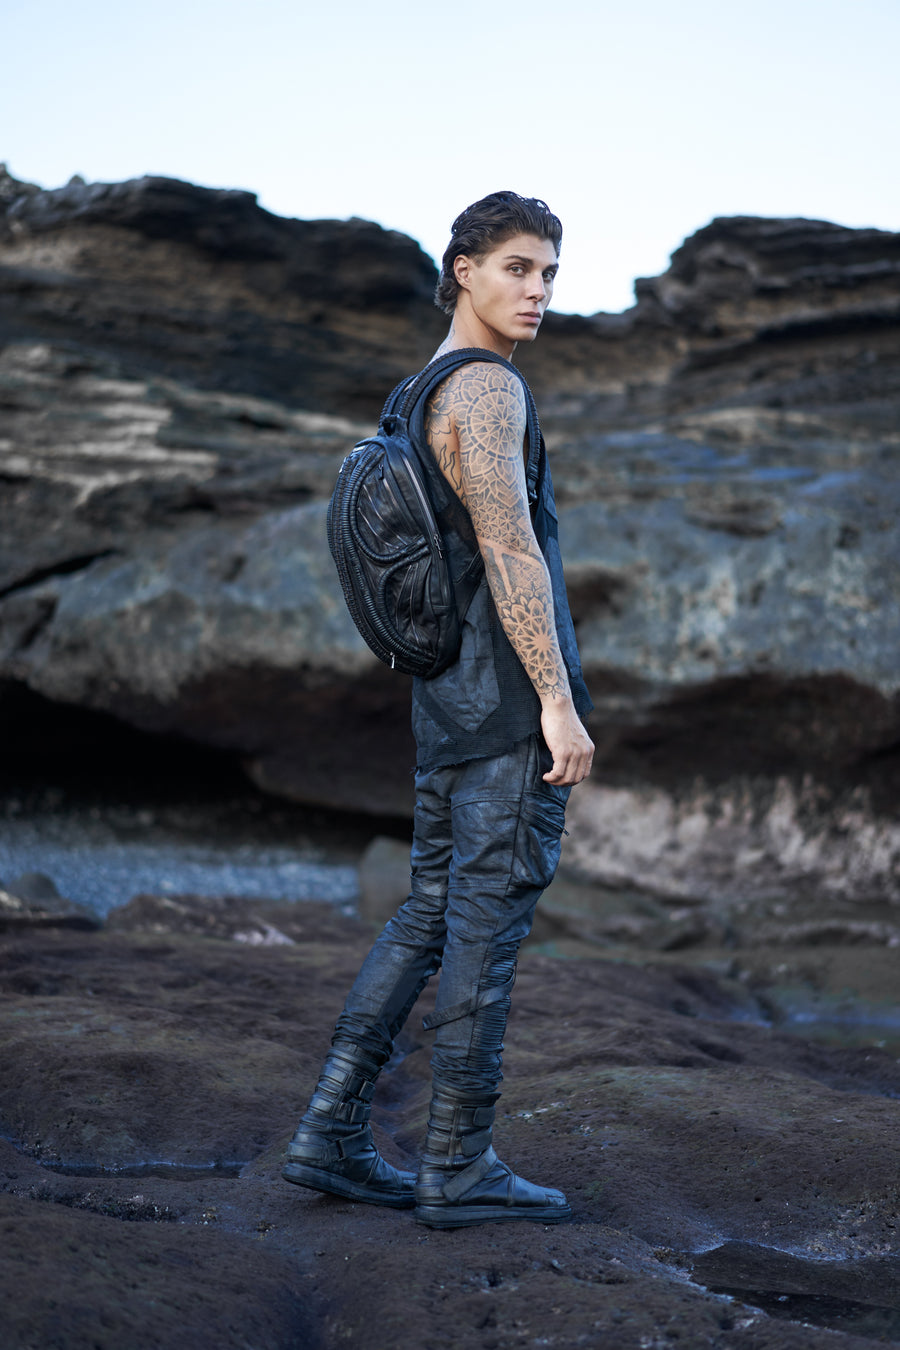 Men's alternative apparel in post-apocalyptic fashion with leather alien backpack